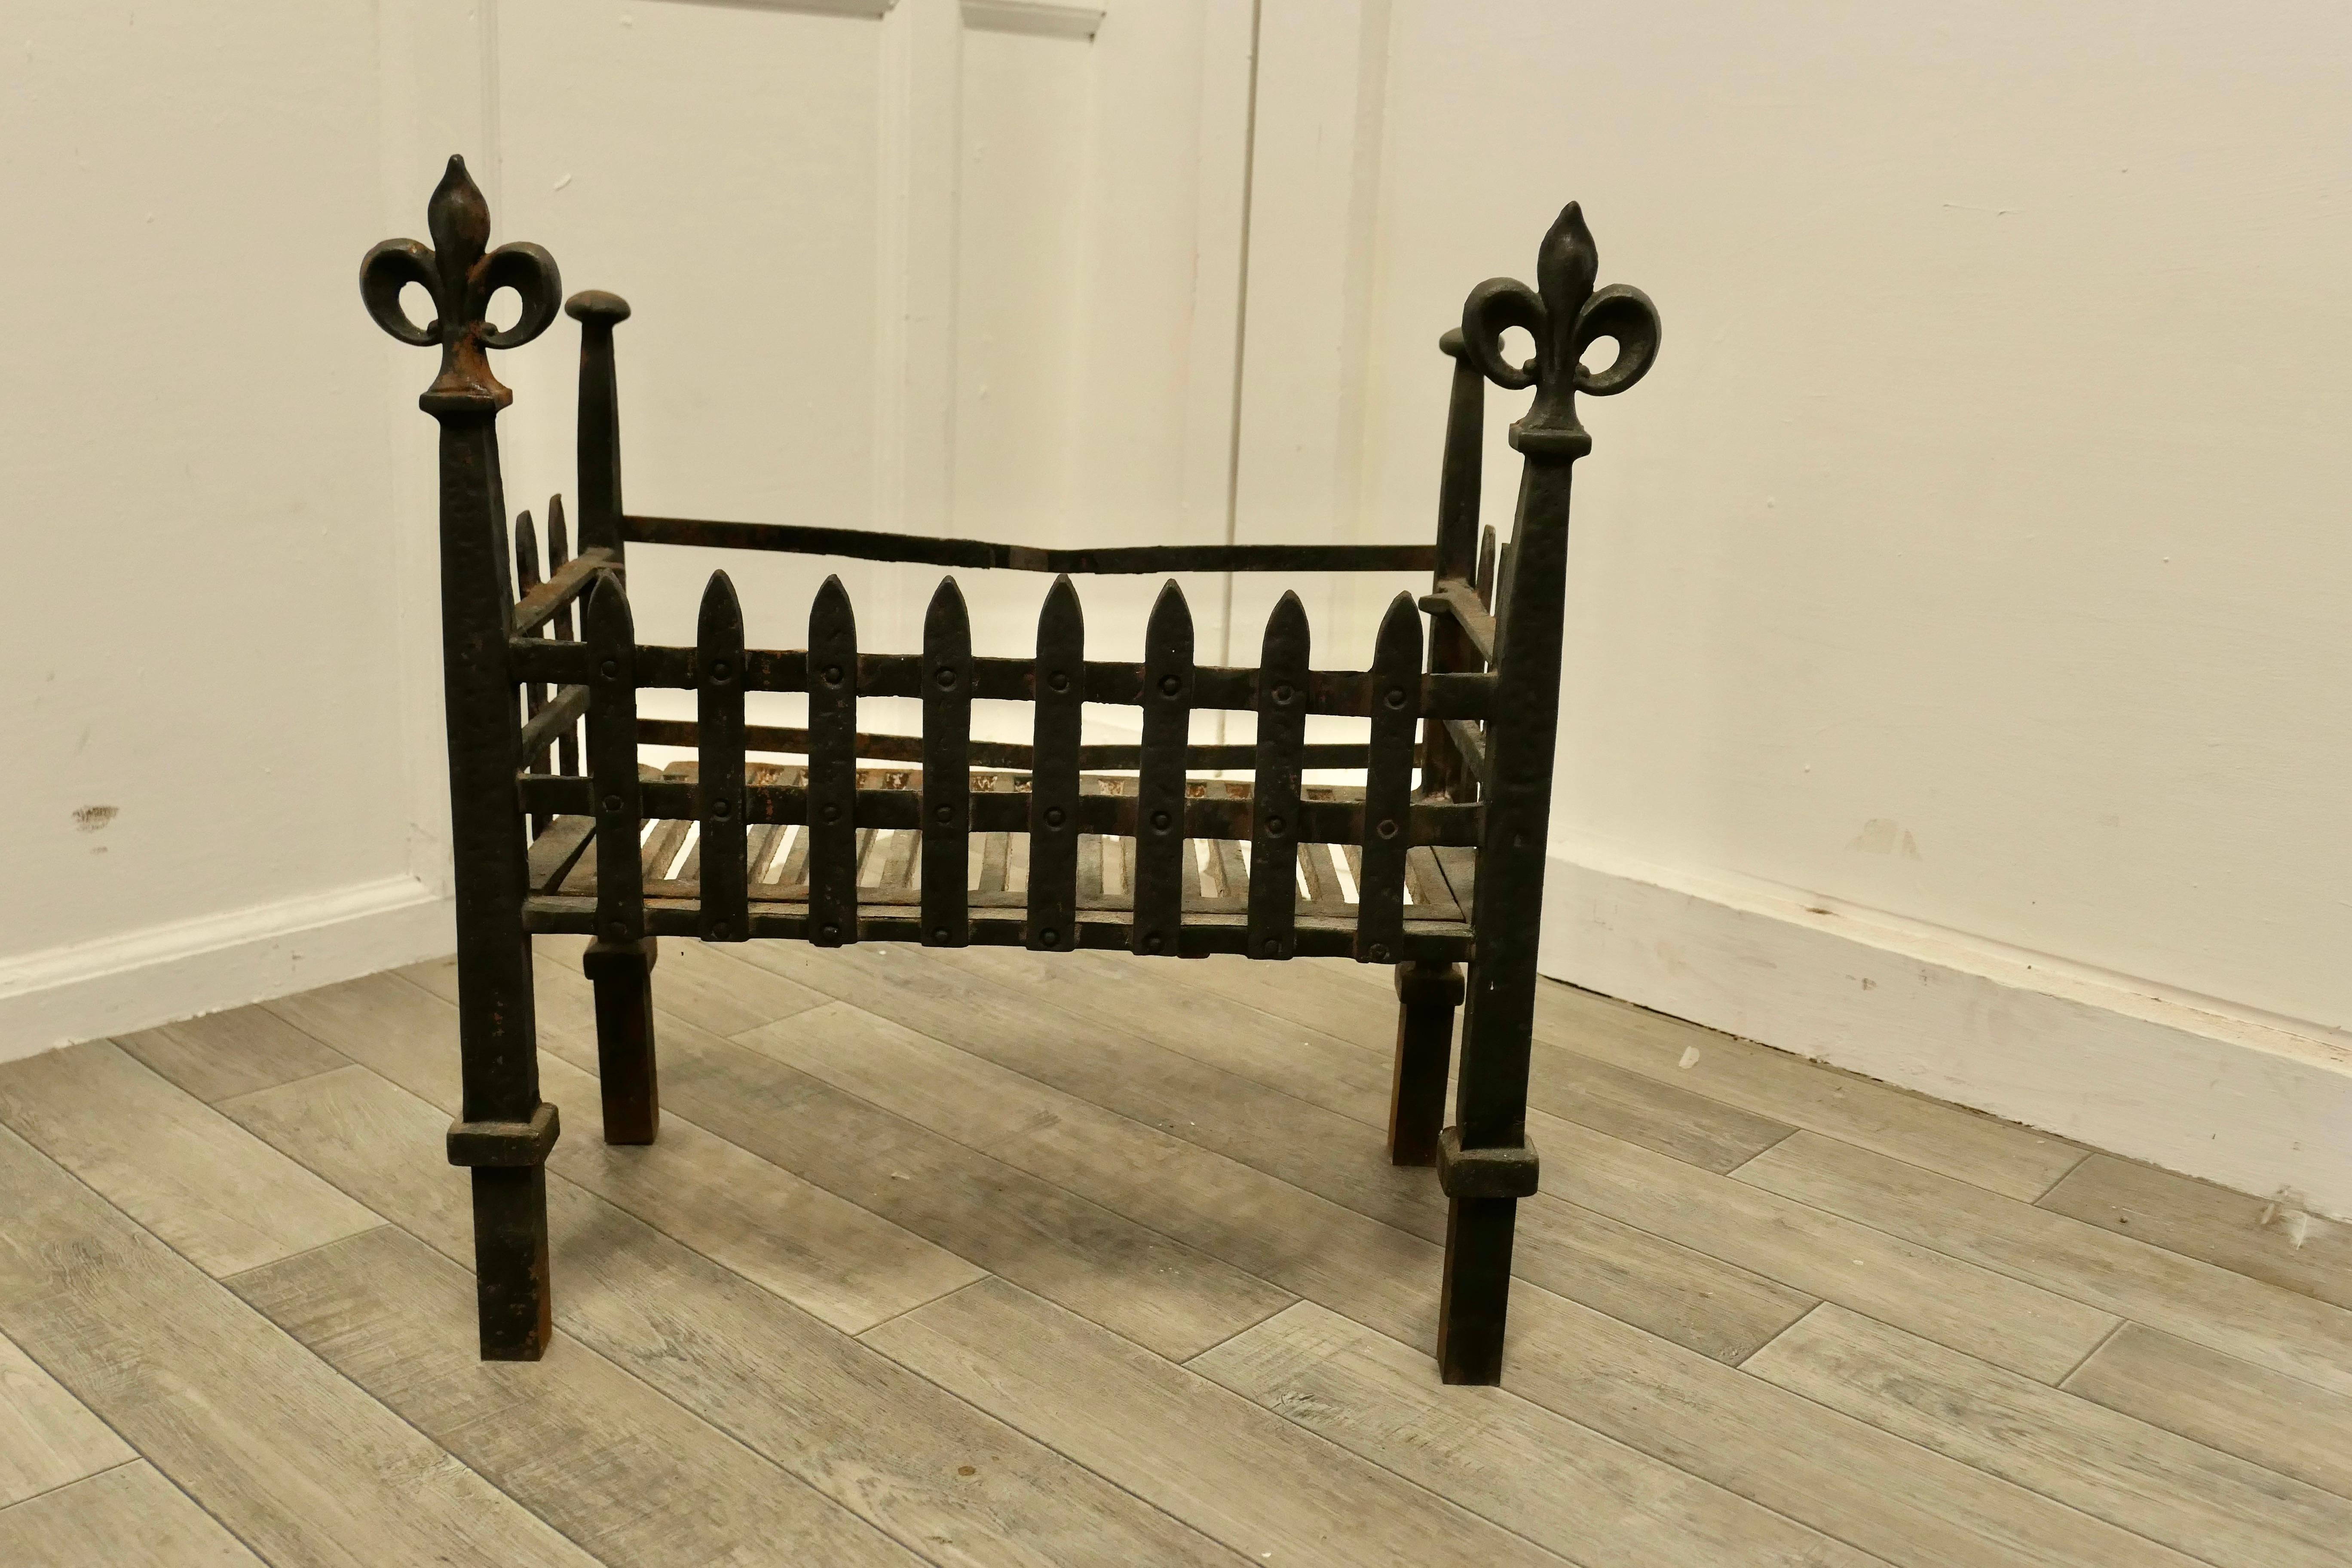 Inglenook free standing fire basket, iron fire grate.

The grate has high cast and wrought iron rails all around with fleur des lys finials at the front corners 
The grate is in good used condition with agent in the top rail at the back
The